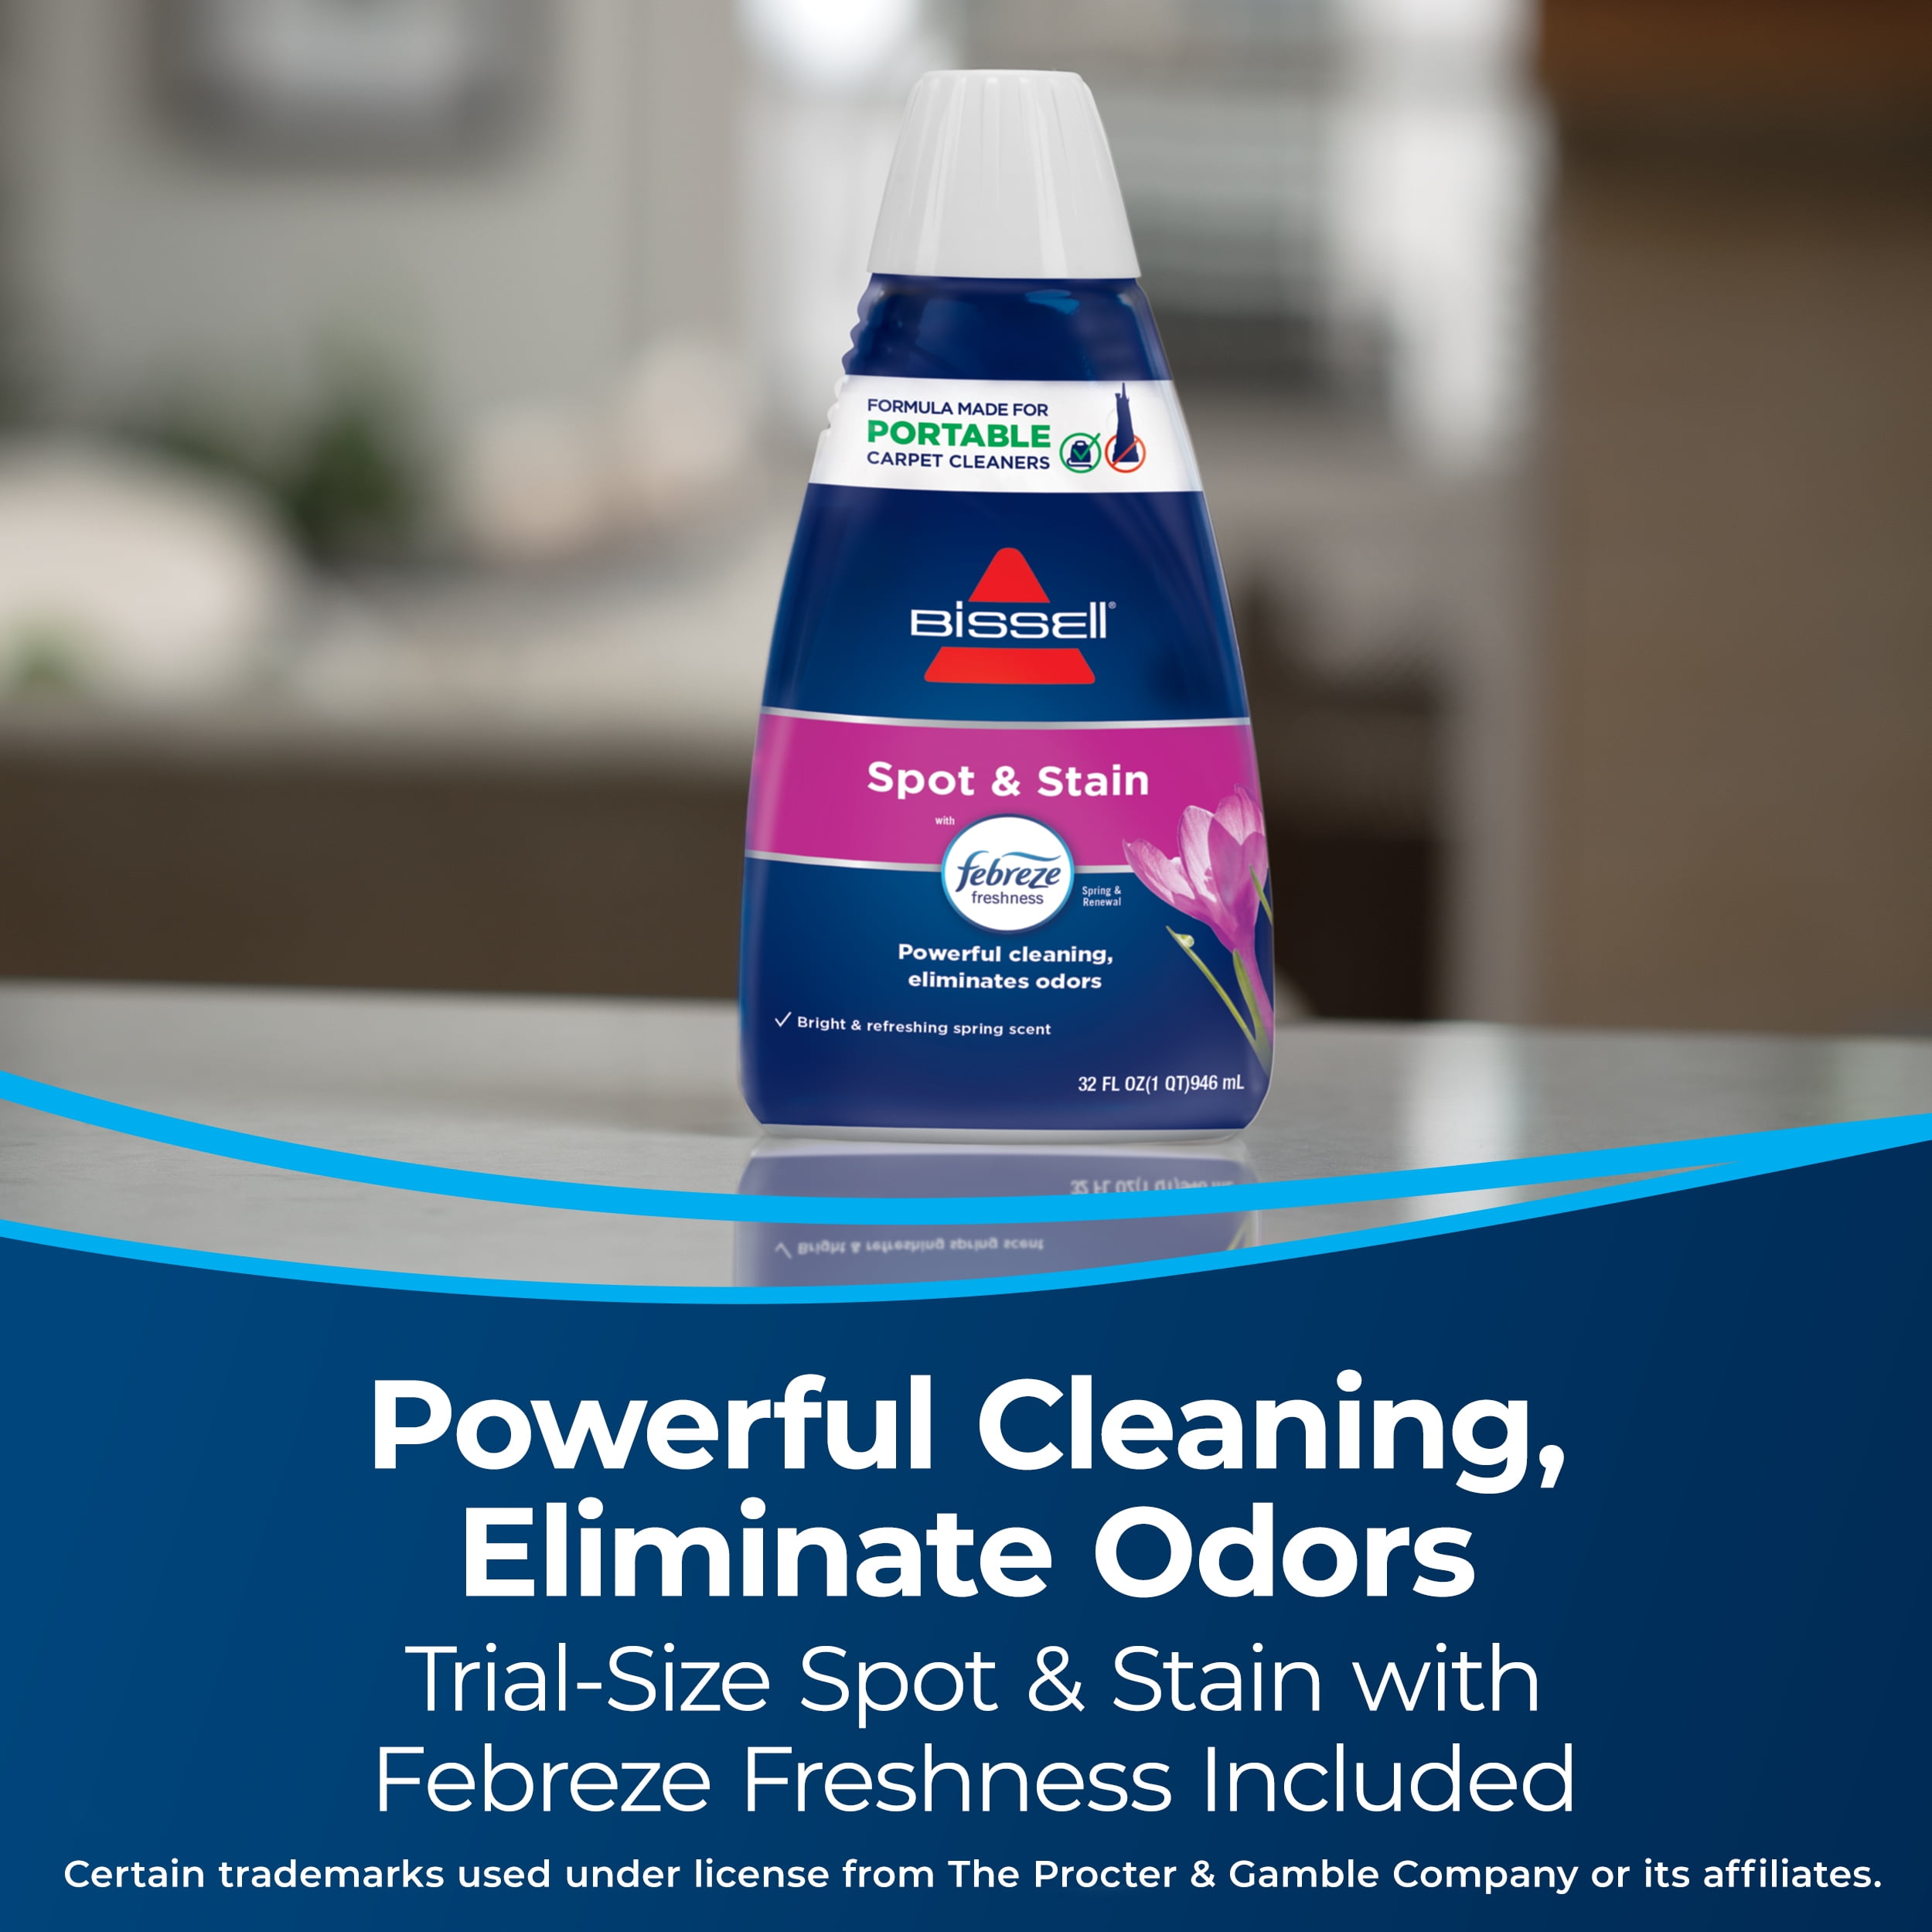 DIY Upholstery Cleaner vs Bissell Cleaning Solution: What Works